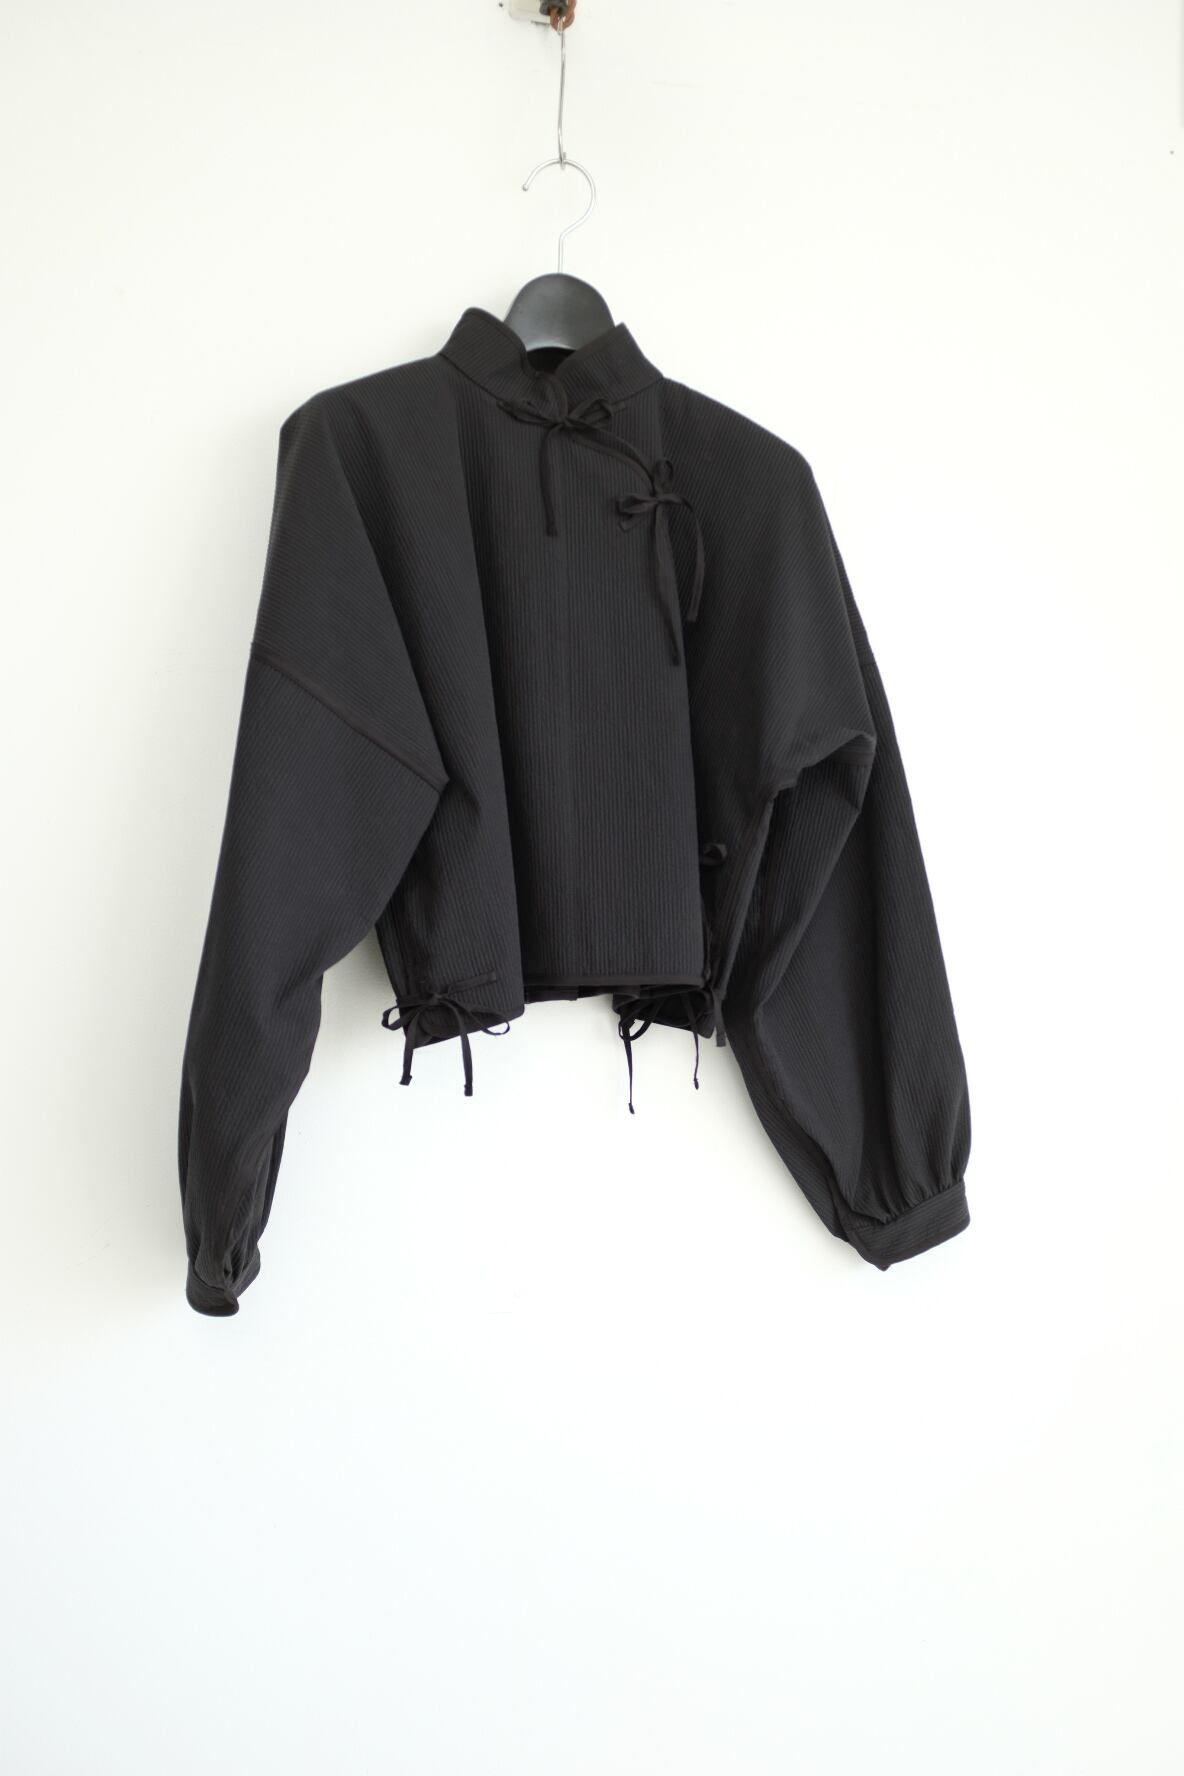 [WRYHT]ORIENTAL FRONT CROPPED JACKET BLACK | YES-姫路の美容院と服のお店YES(イエス)です。  powered by BASE